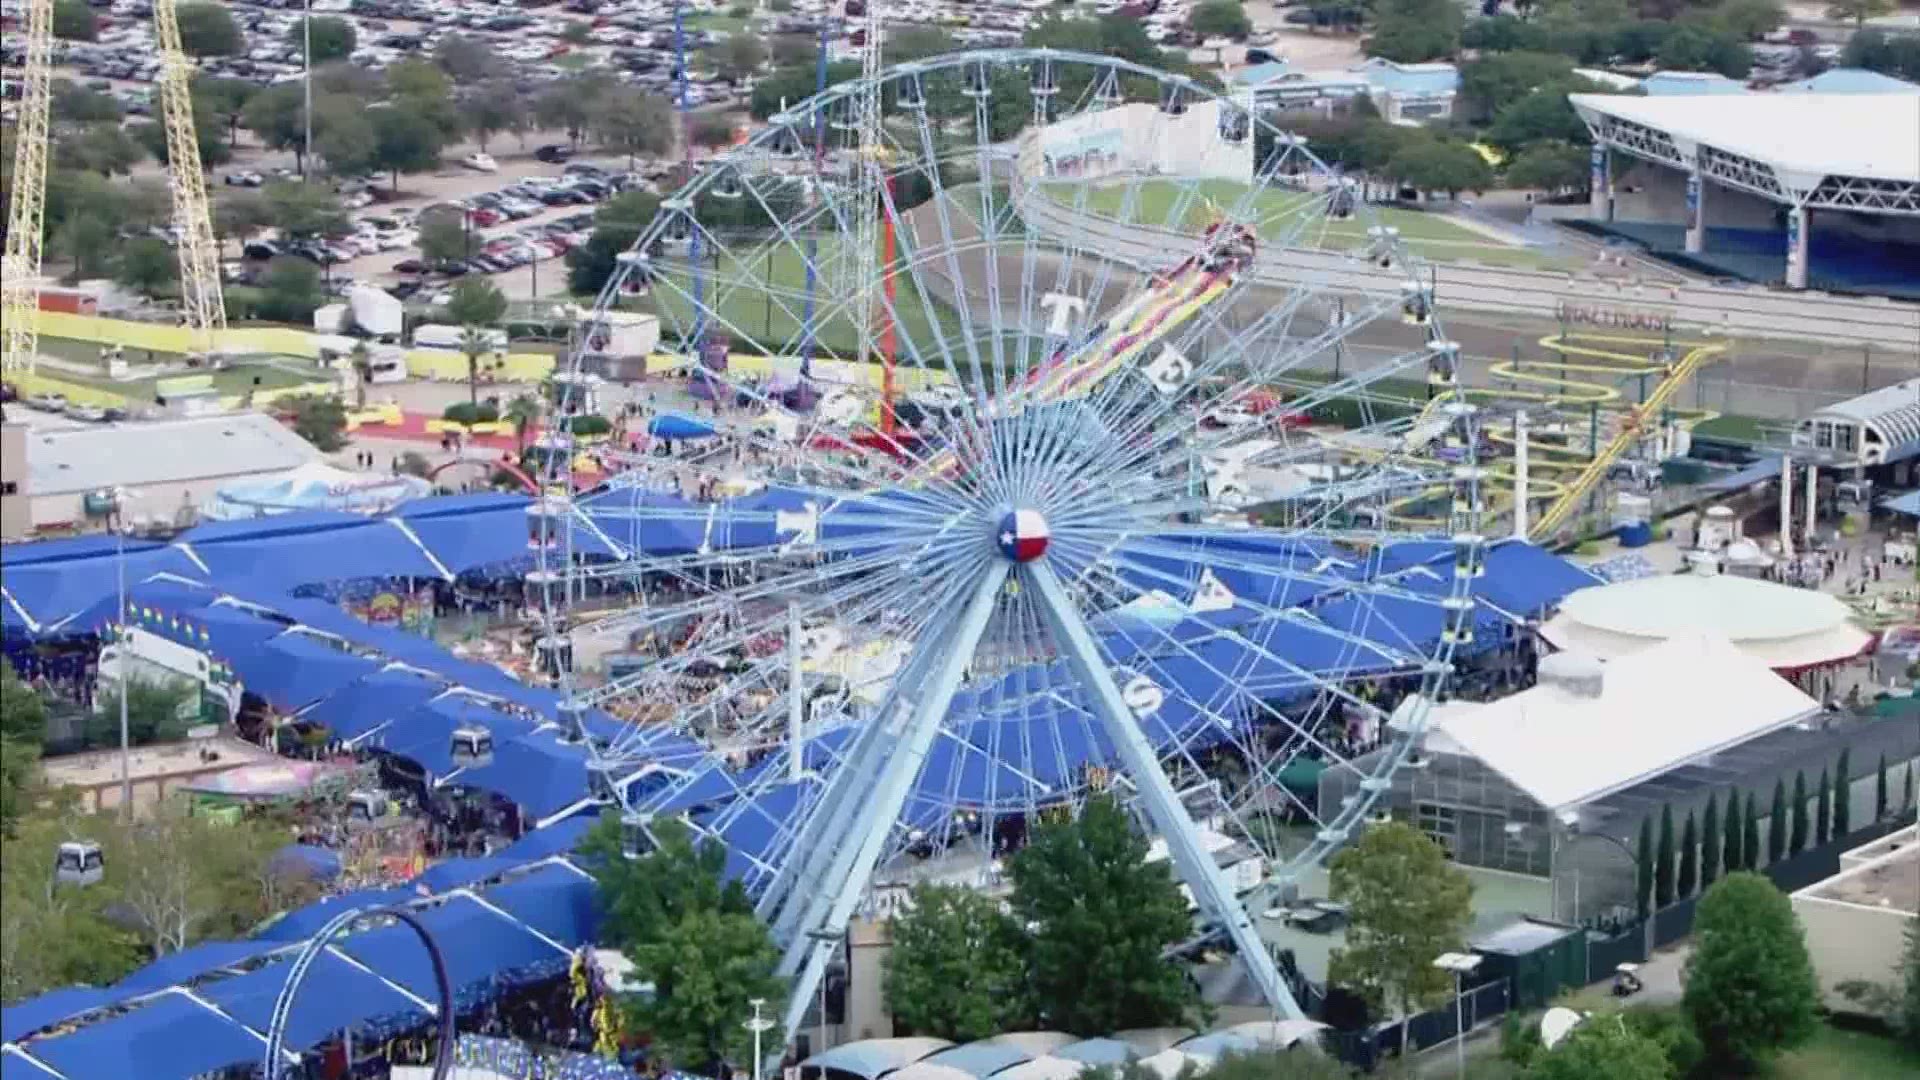 Gates will open on Sept. 24 and the fair will run through Oct. 17, officials said in a release.